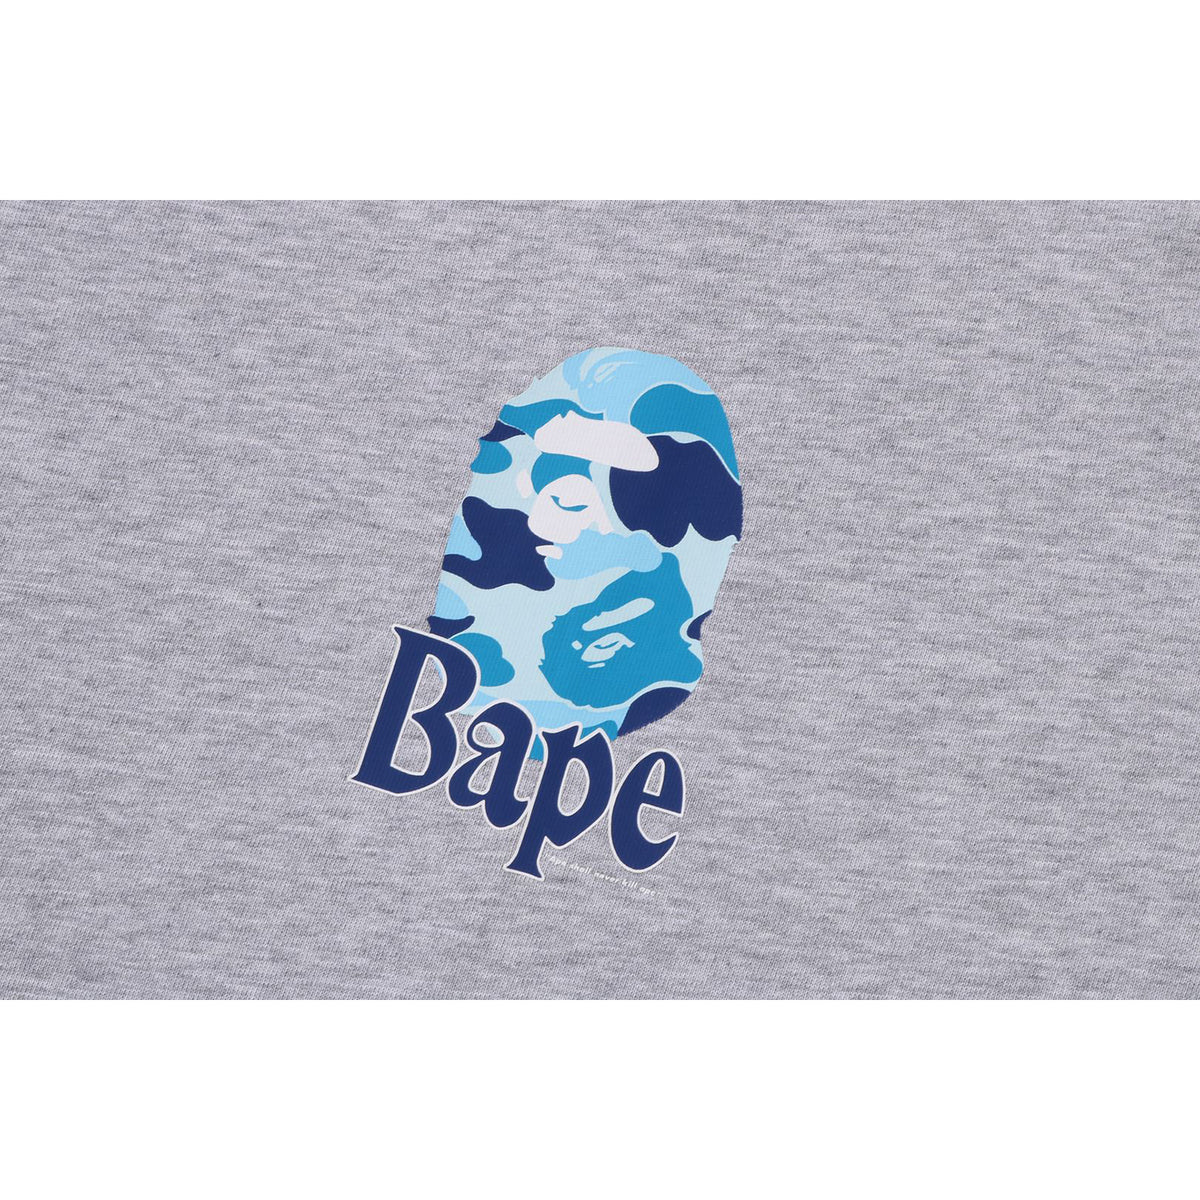 FLORA APE HEAD RELAXED FIT TEE MENS